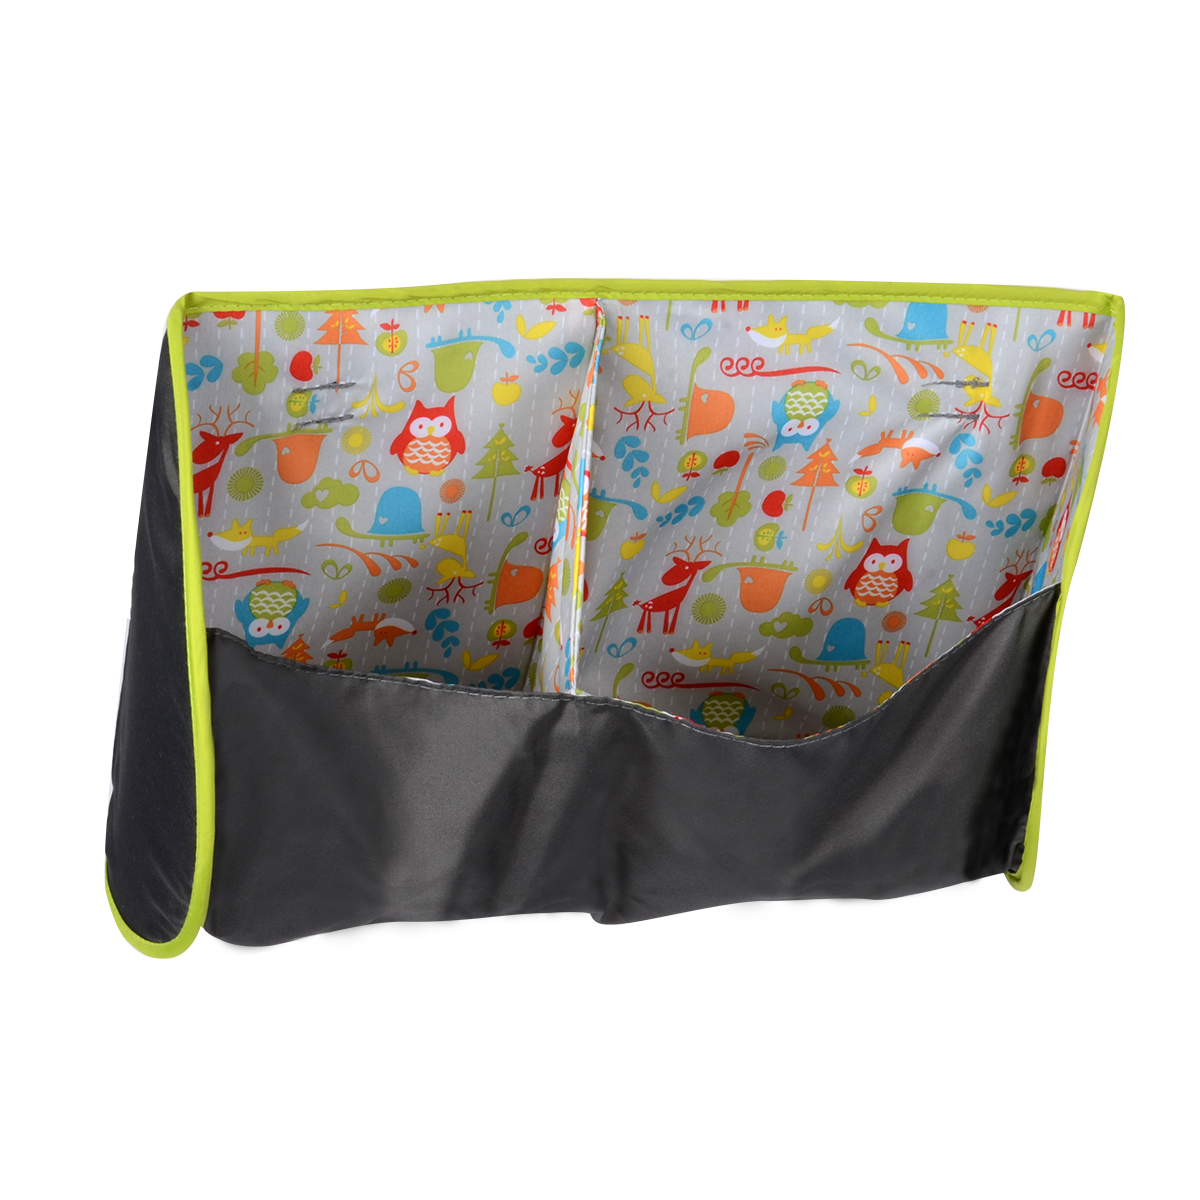 BabySuite Basic Play Yards Replacement